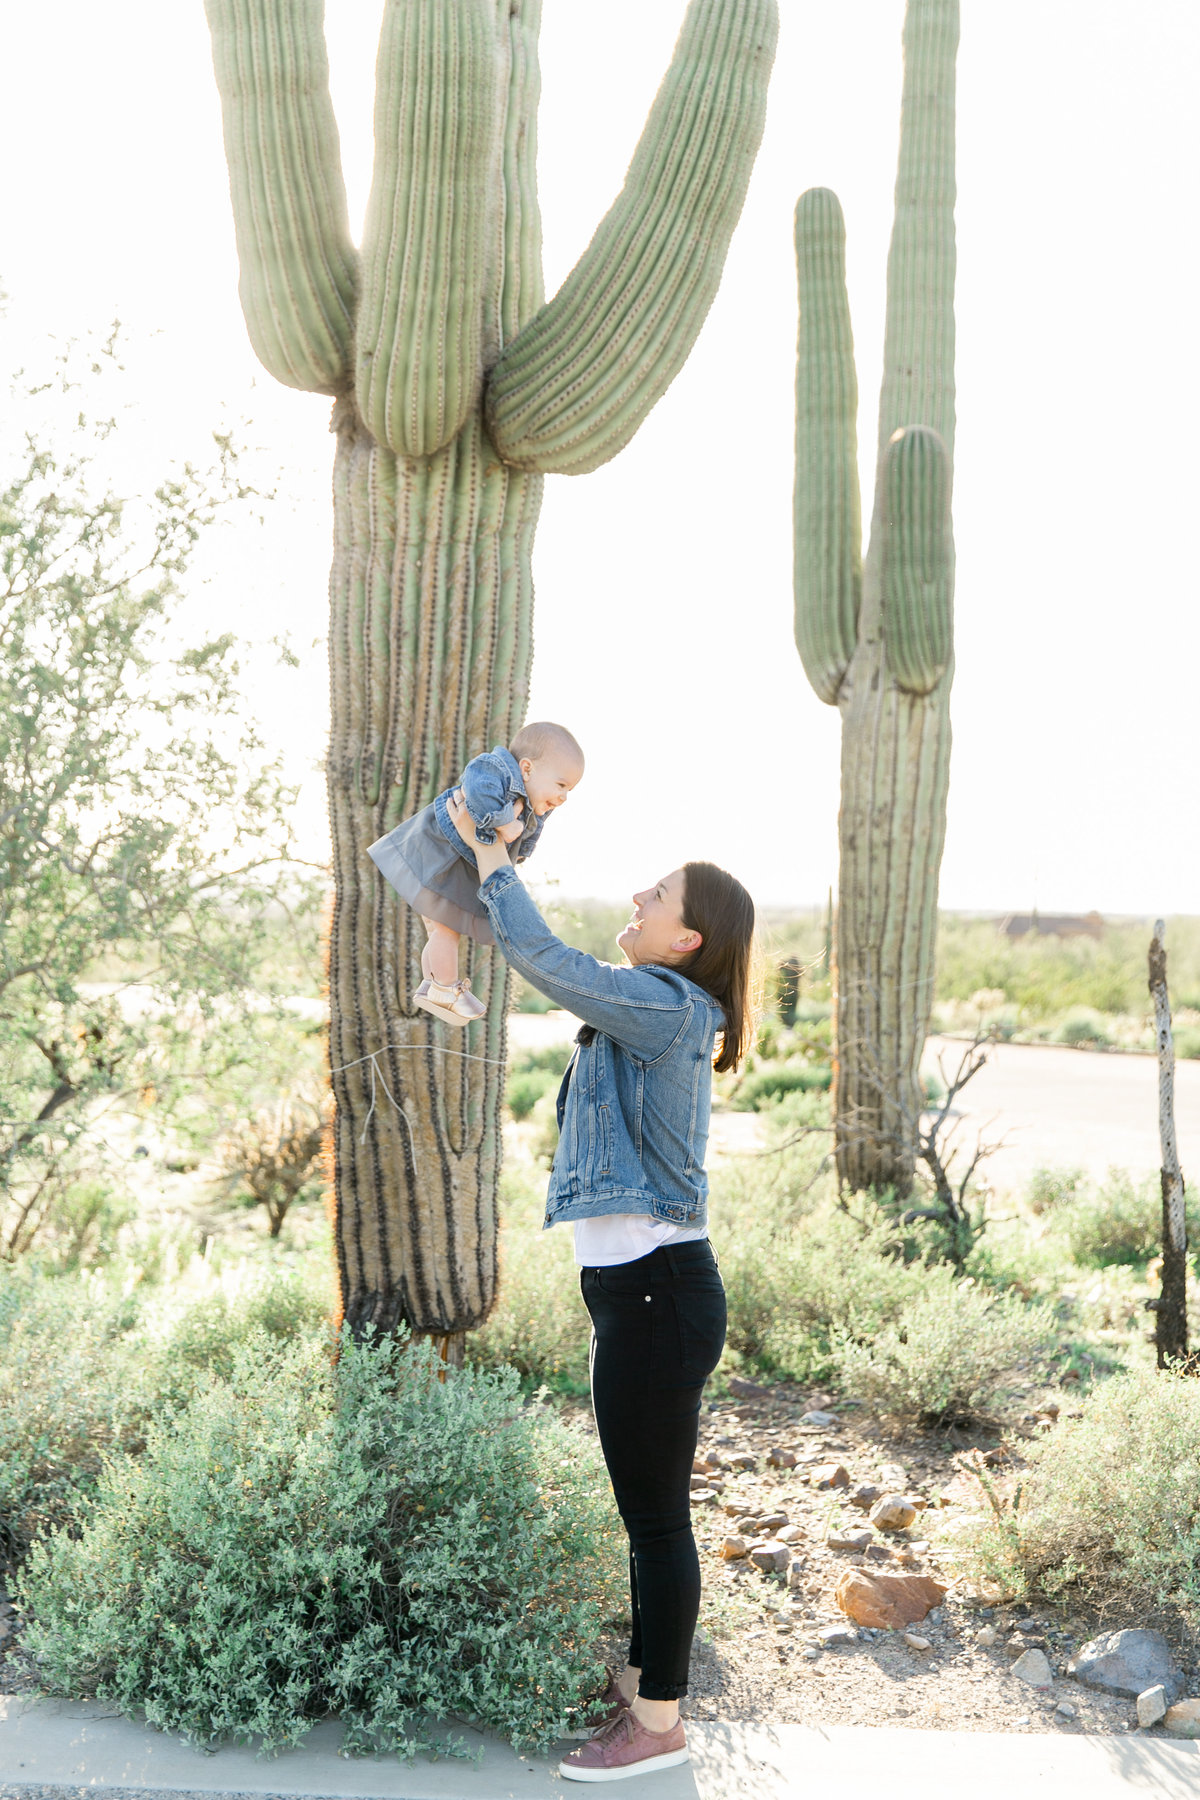 Karlie Colleen Photography - Scottsdale family photography - Victoria & family-25